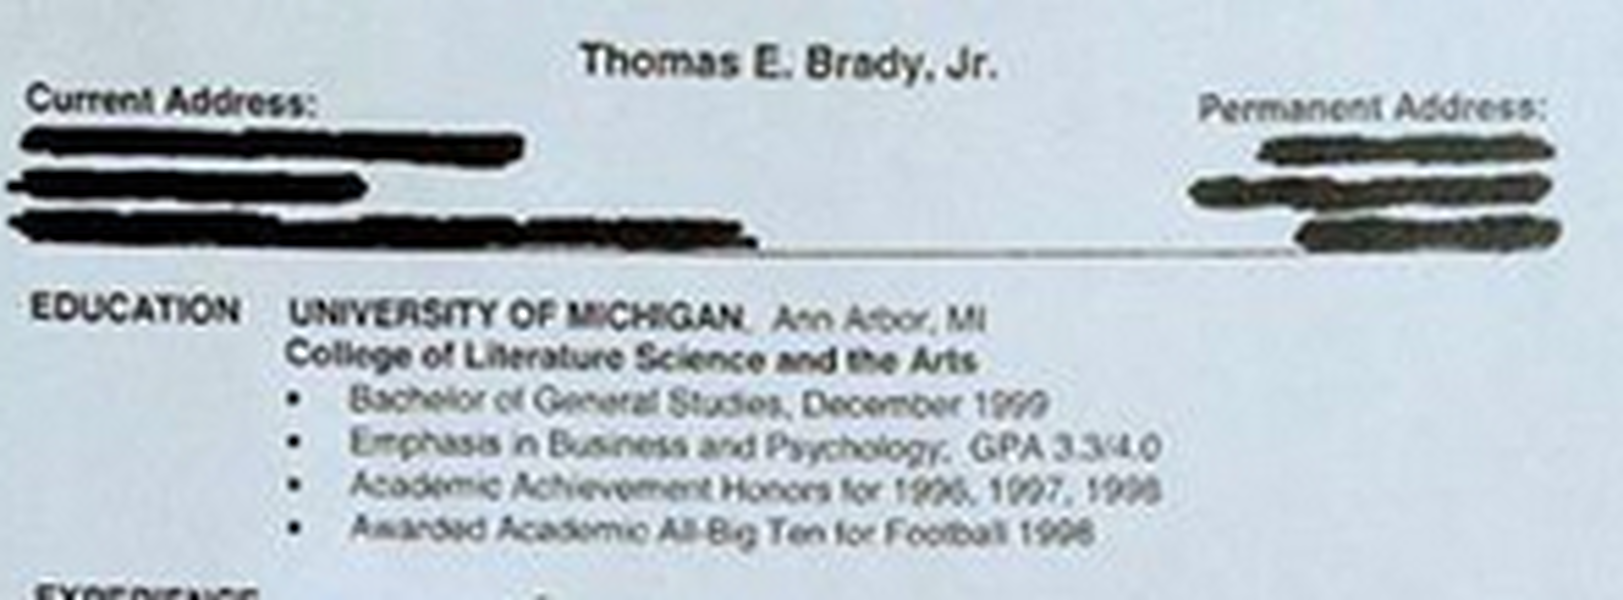 Tom Brady&#039;s old resume proves he was just as inexperienced as you were coming out of college